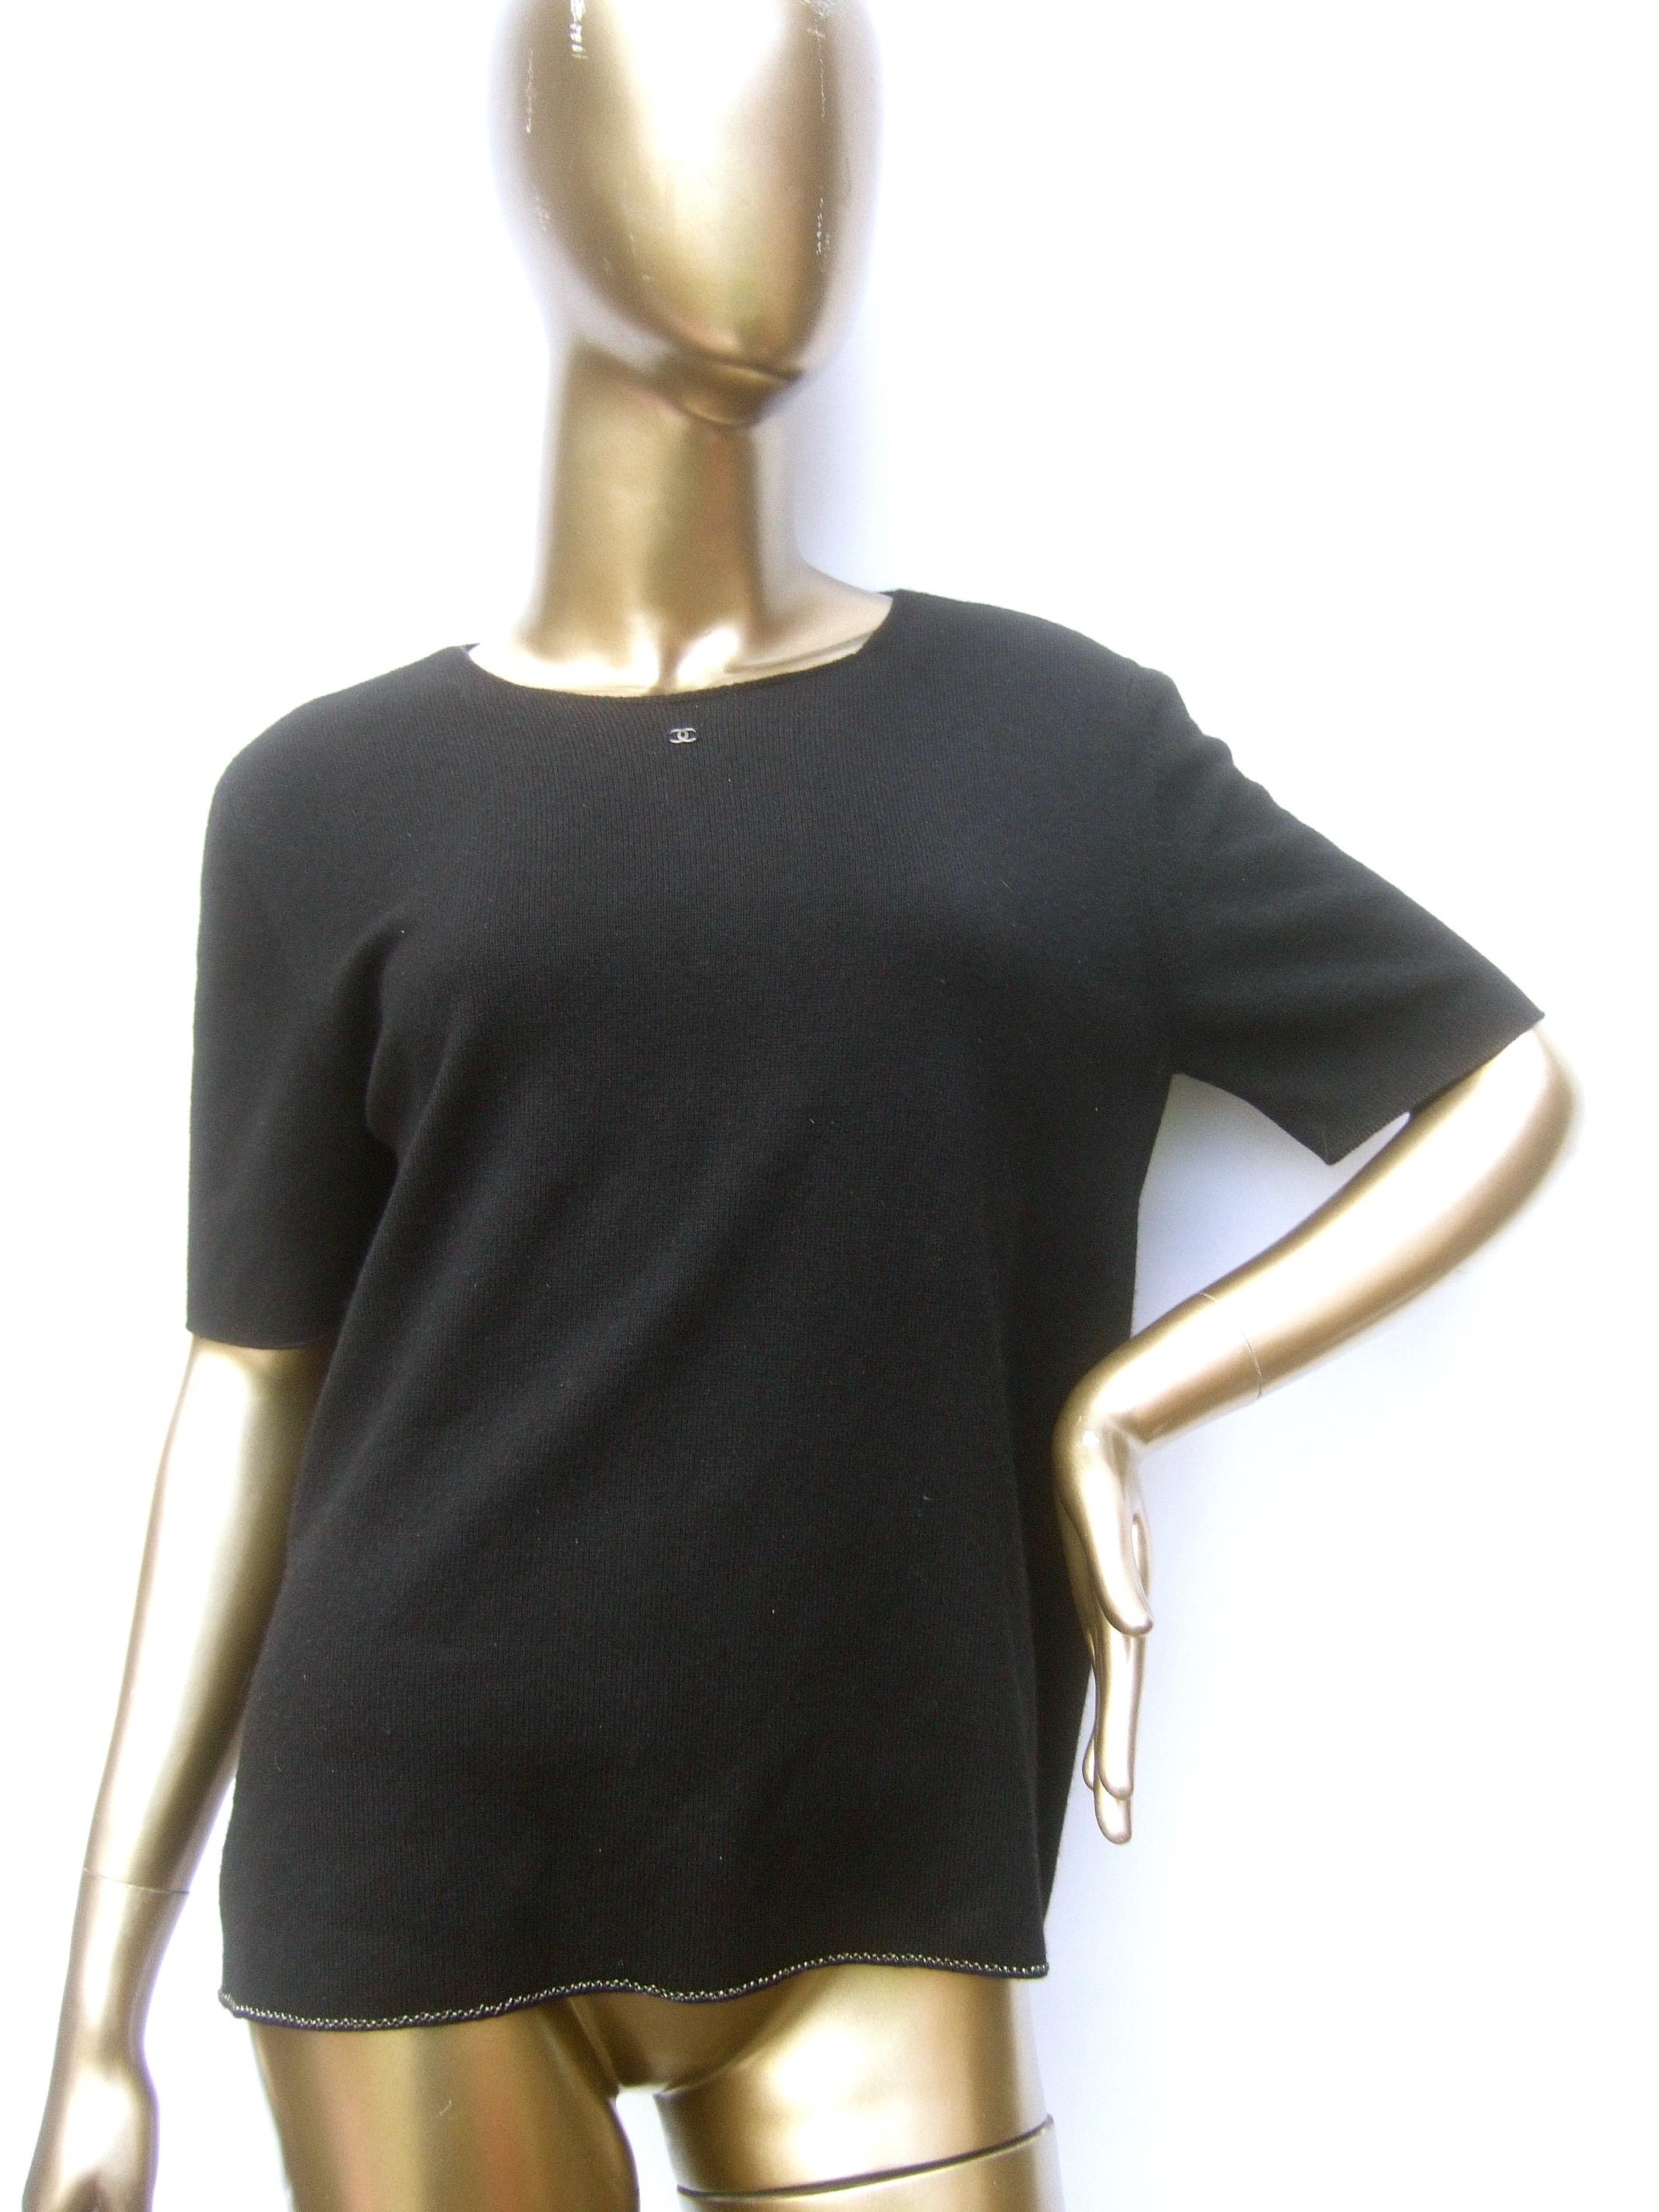 Chanel black cashmere silk blend short sleeve sweater c 1990s

The luxurious sweater is adorned with Chanel's subtle C.C. initials at the center neckline in tiny silver metal letters
The exterior hemline is designed with a restrained pewter-tone